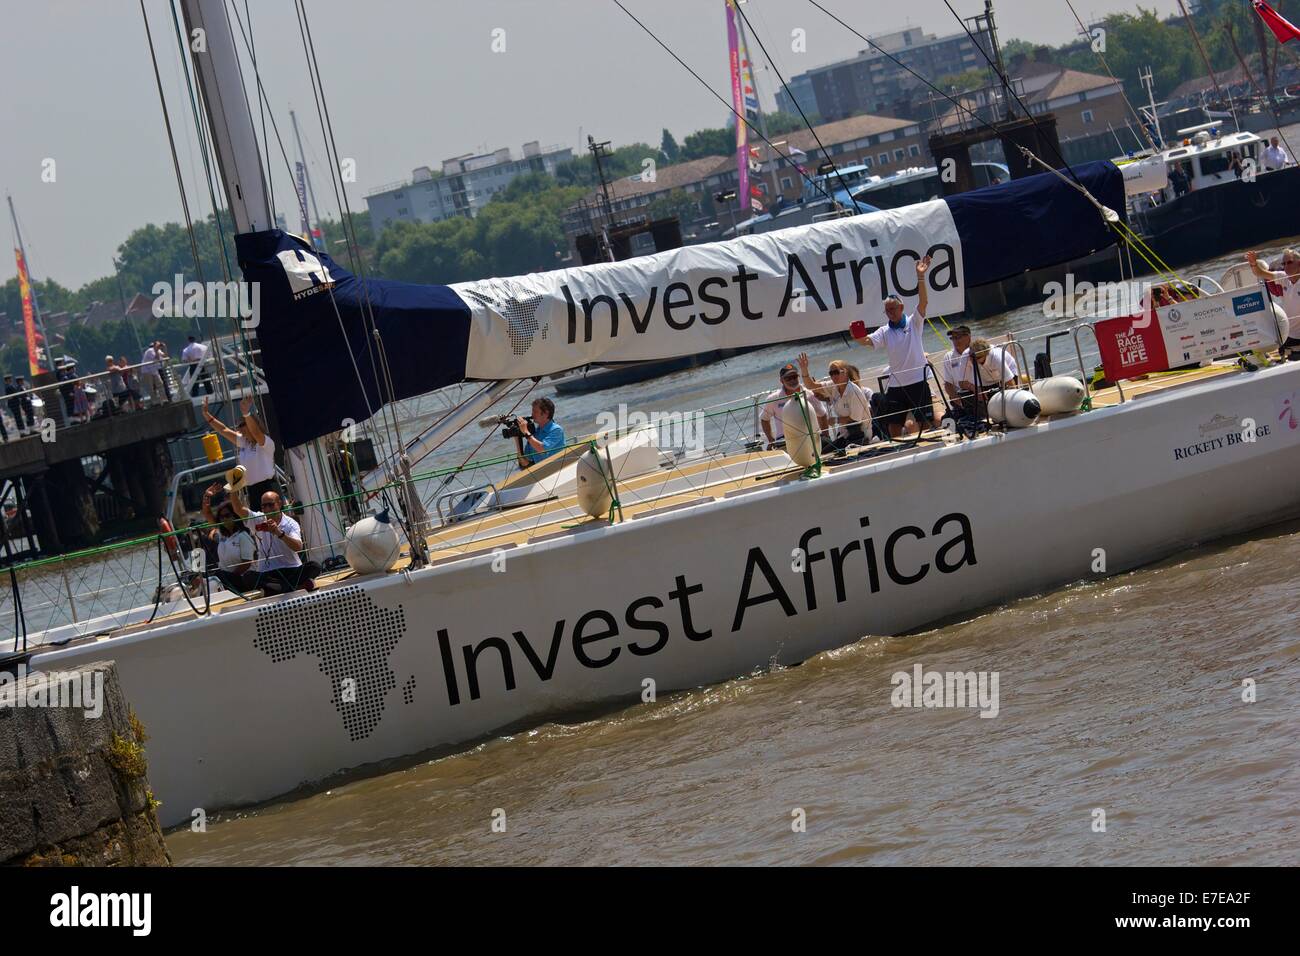 Clipper round the world yacht race 2013/14 Invest Africa voile arrivant à St Katherine Dock Londres Angleterre Europe Banque D'Images